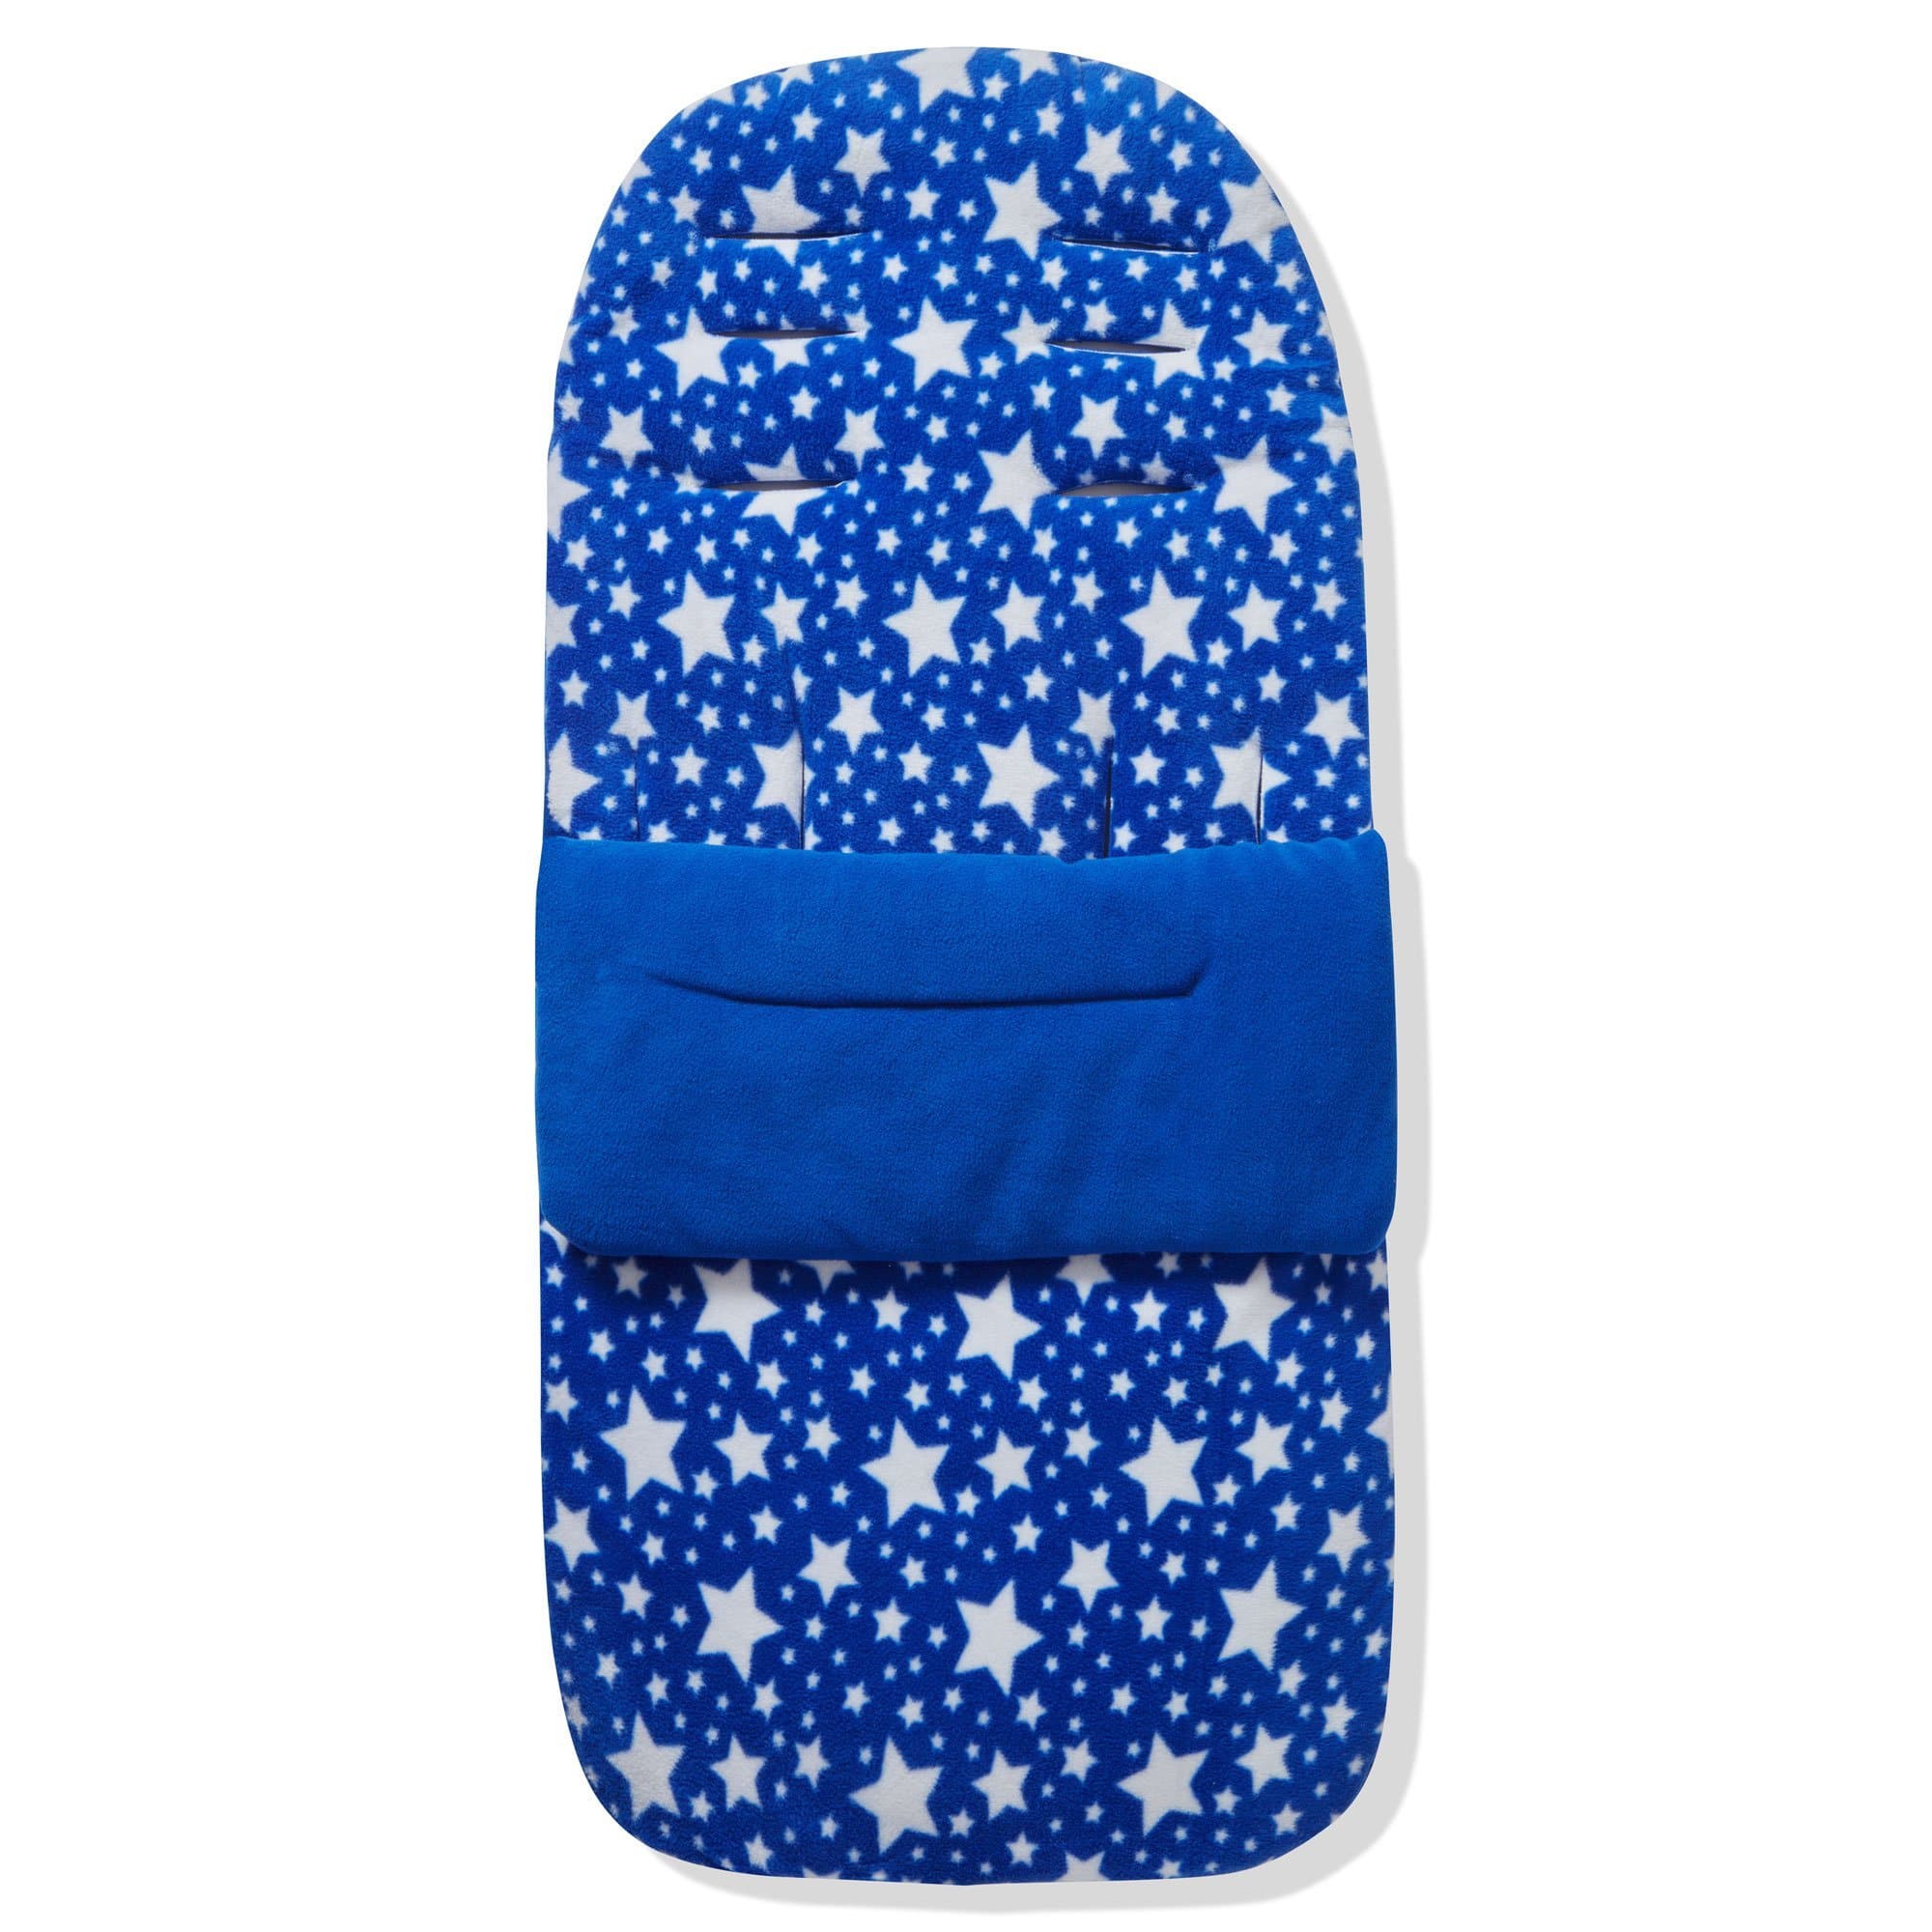 Fleece Footmuff / Cosy Toes Compatible with Petite - Blue Star / Fits All Models | For Your Little One